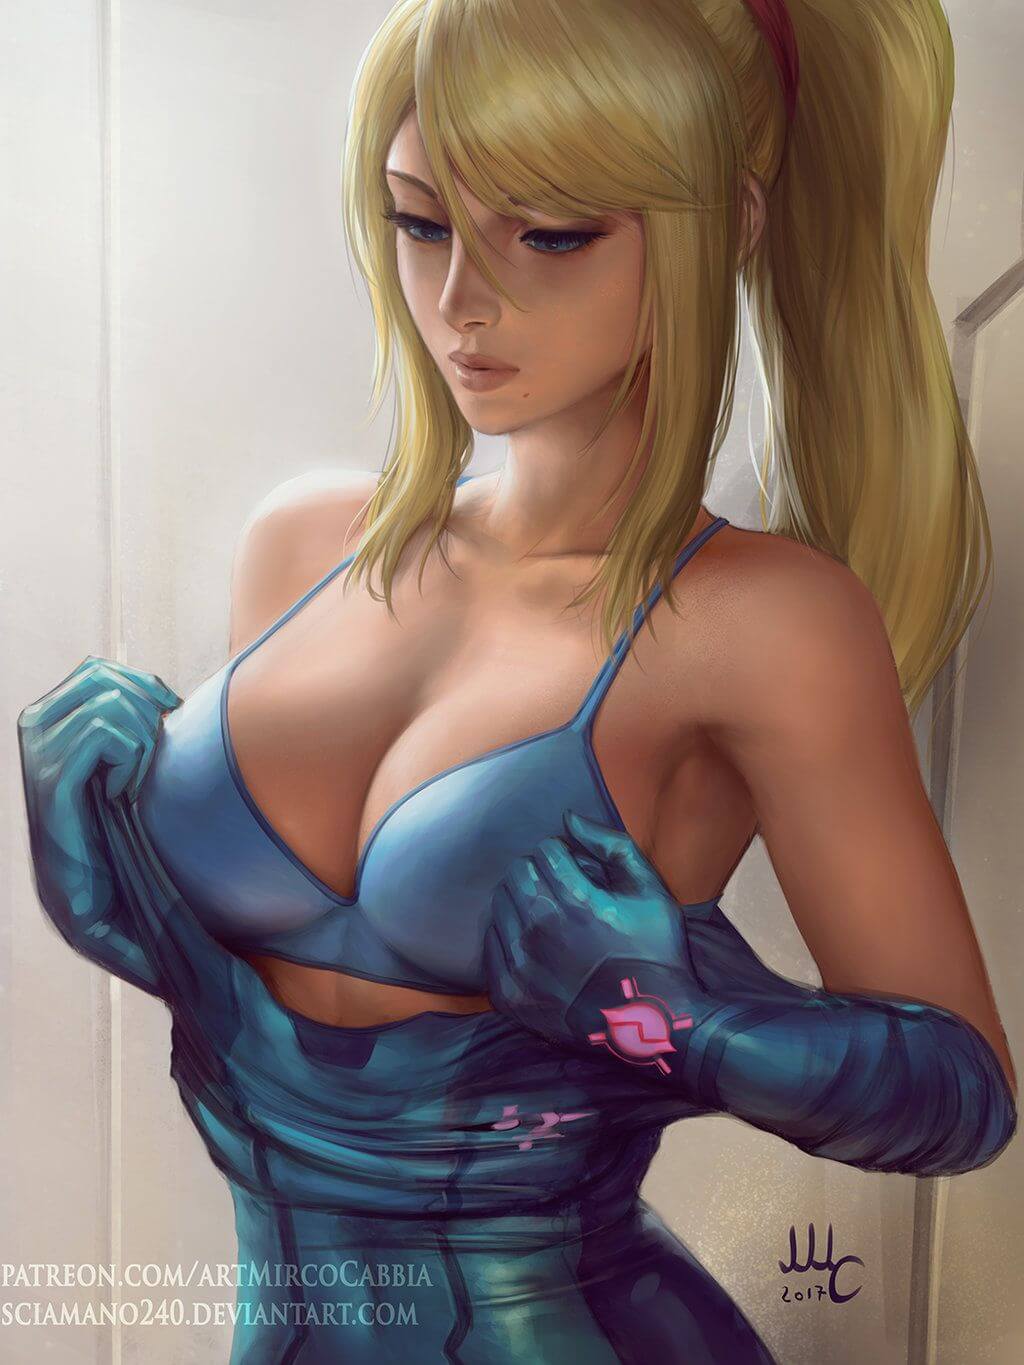 55+ Hot Pictures Of Samus Which Will Make You Fantasize Her | Best Of Comic Books